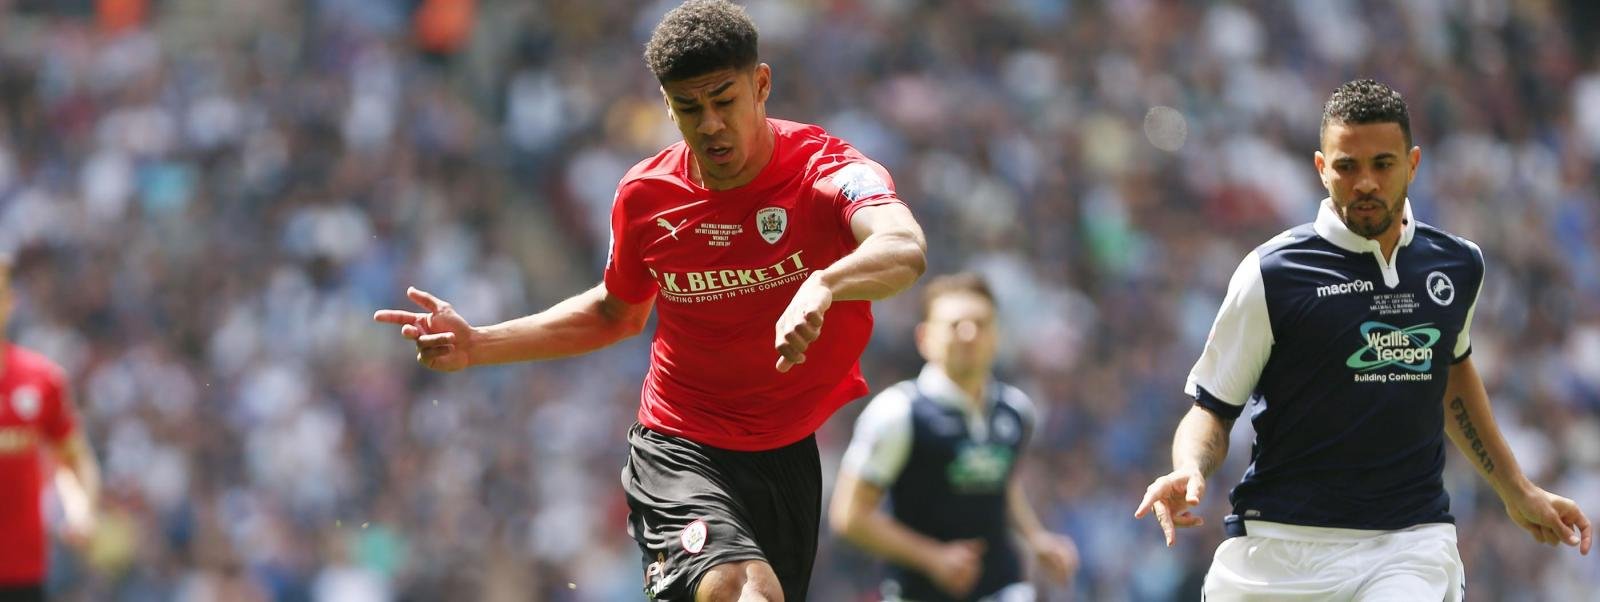 Barnsley beat Millwall in League One play-off final to seal promotion to the Championship